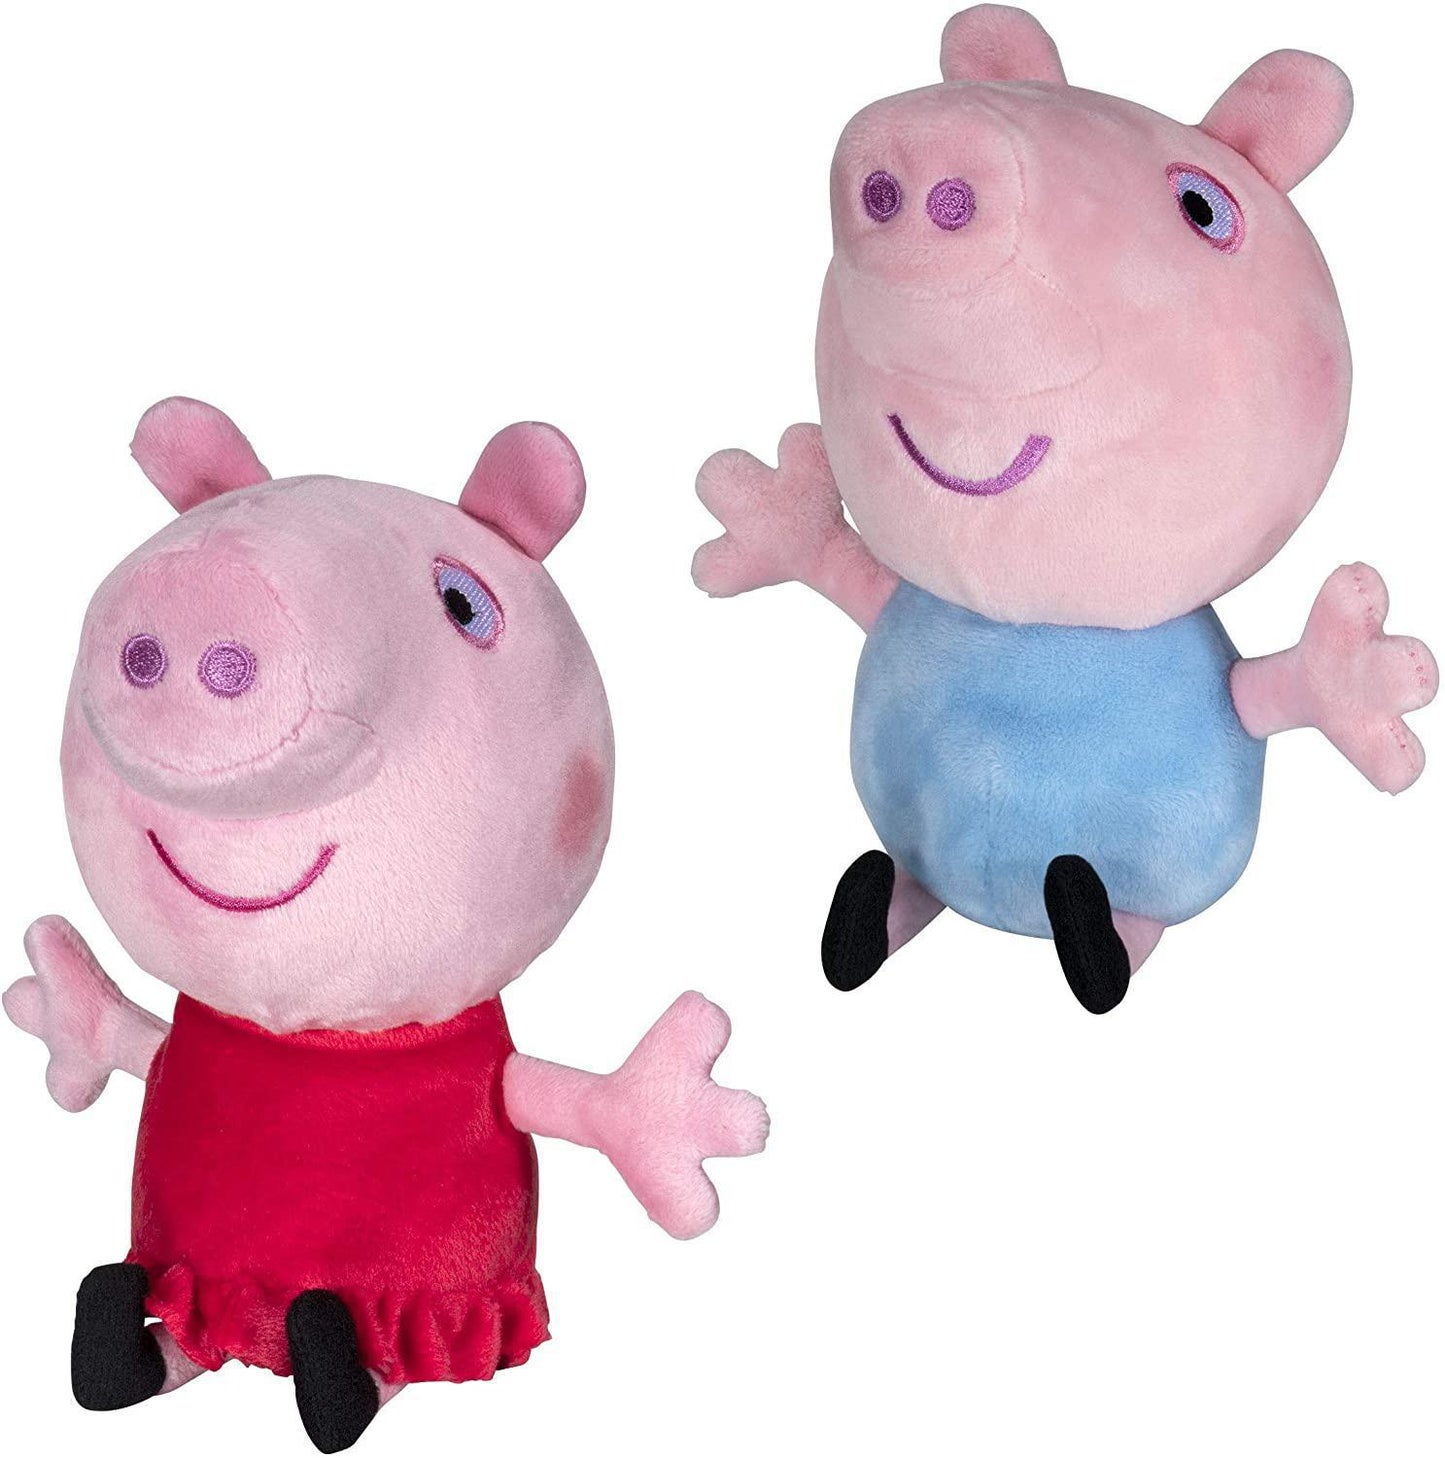 Peppa Pig Family Small Plush Stuffed Animals, Kids Toys for Ages 2 Up – Choose your favorite one (8-10 inches)